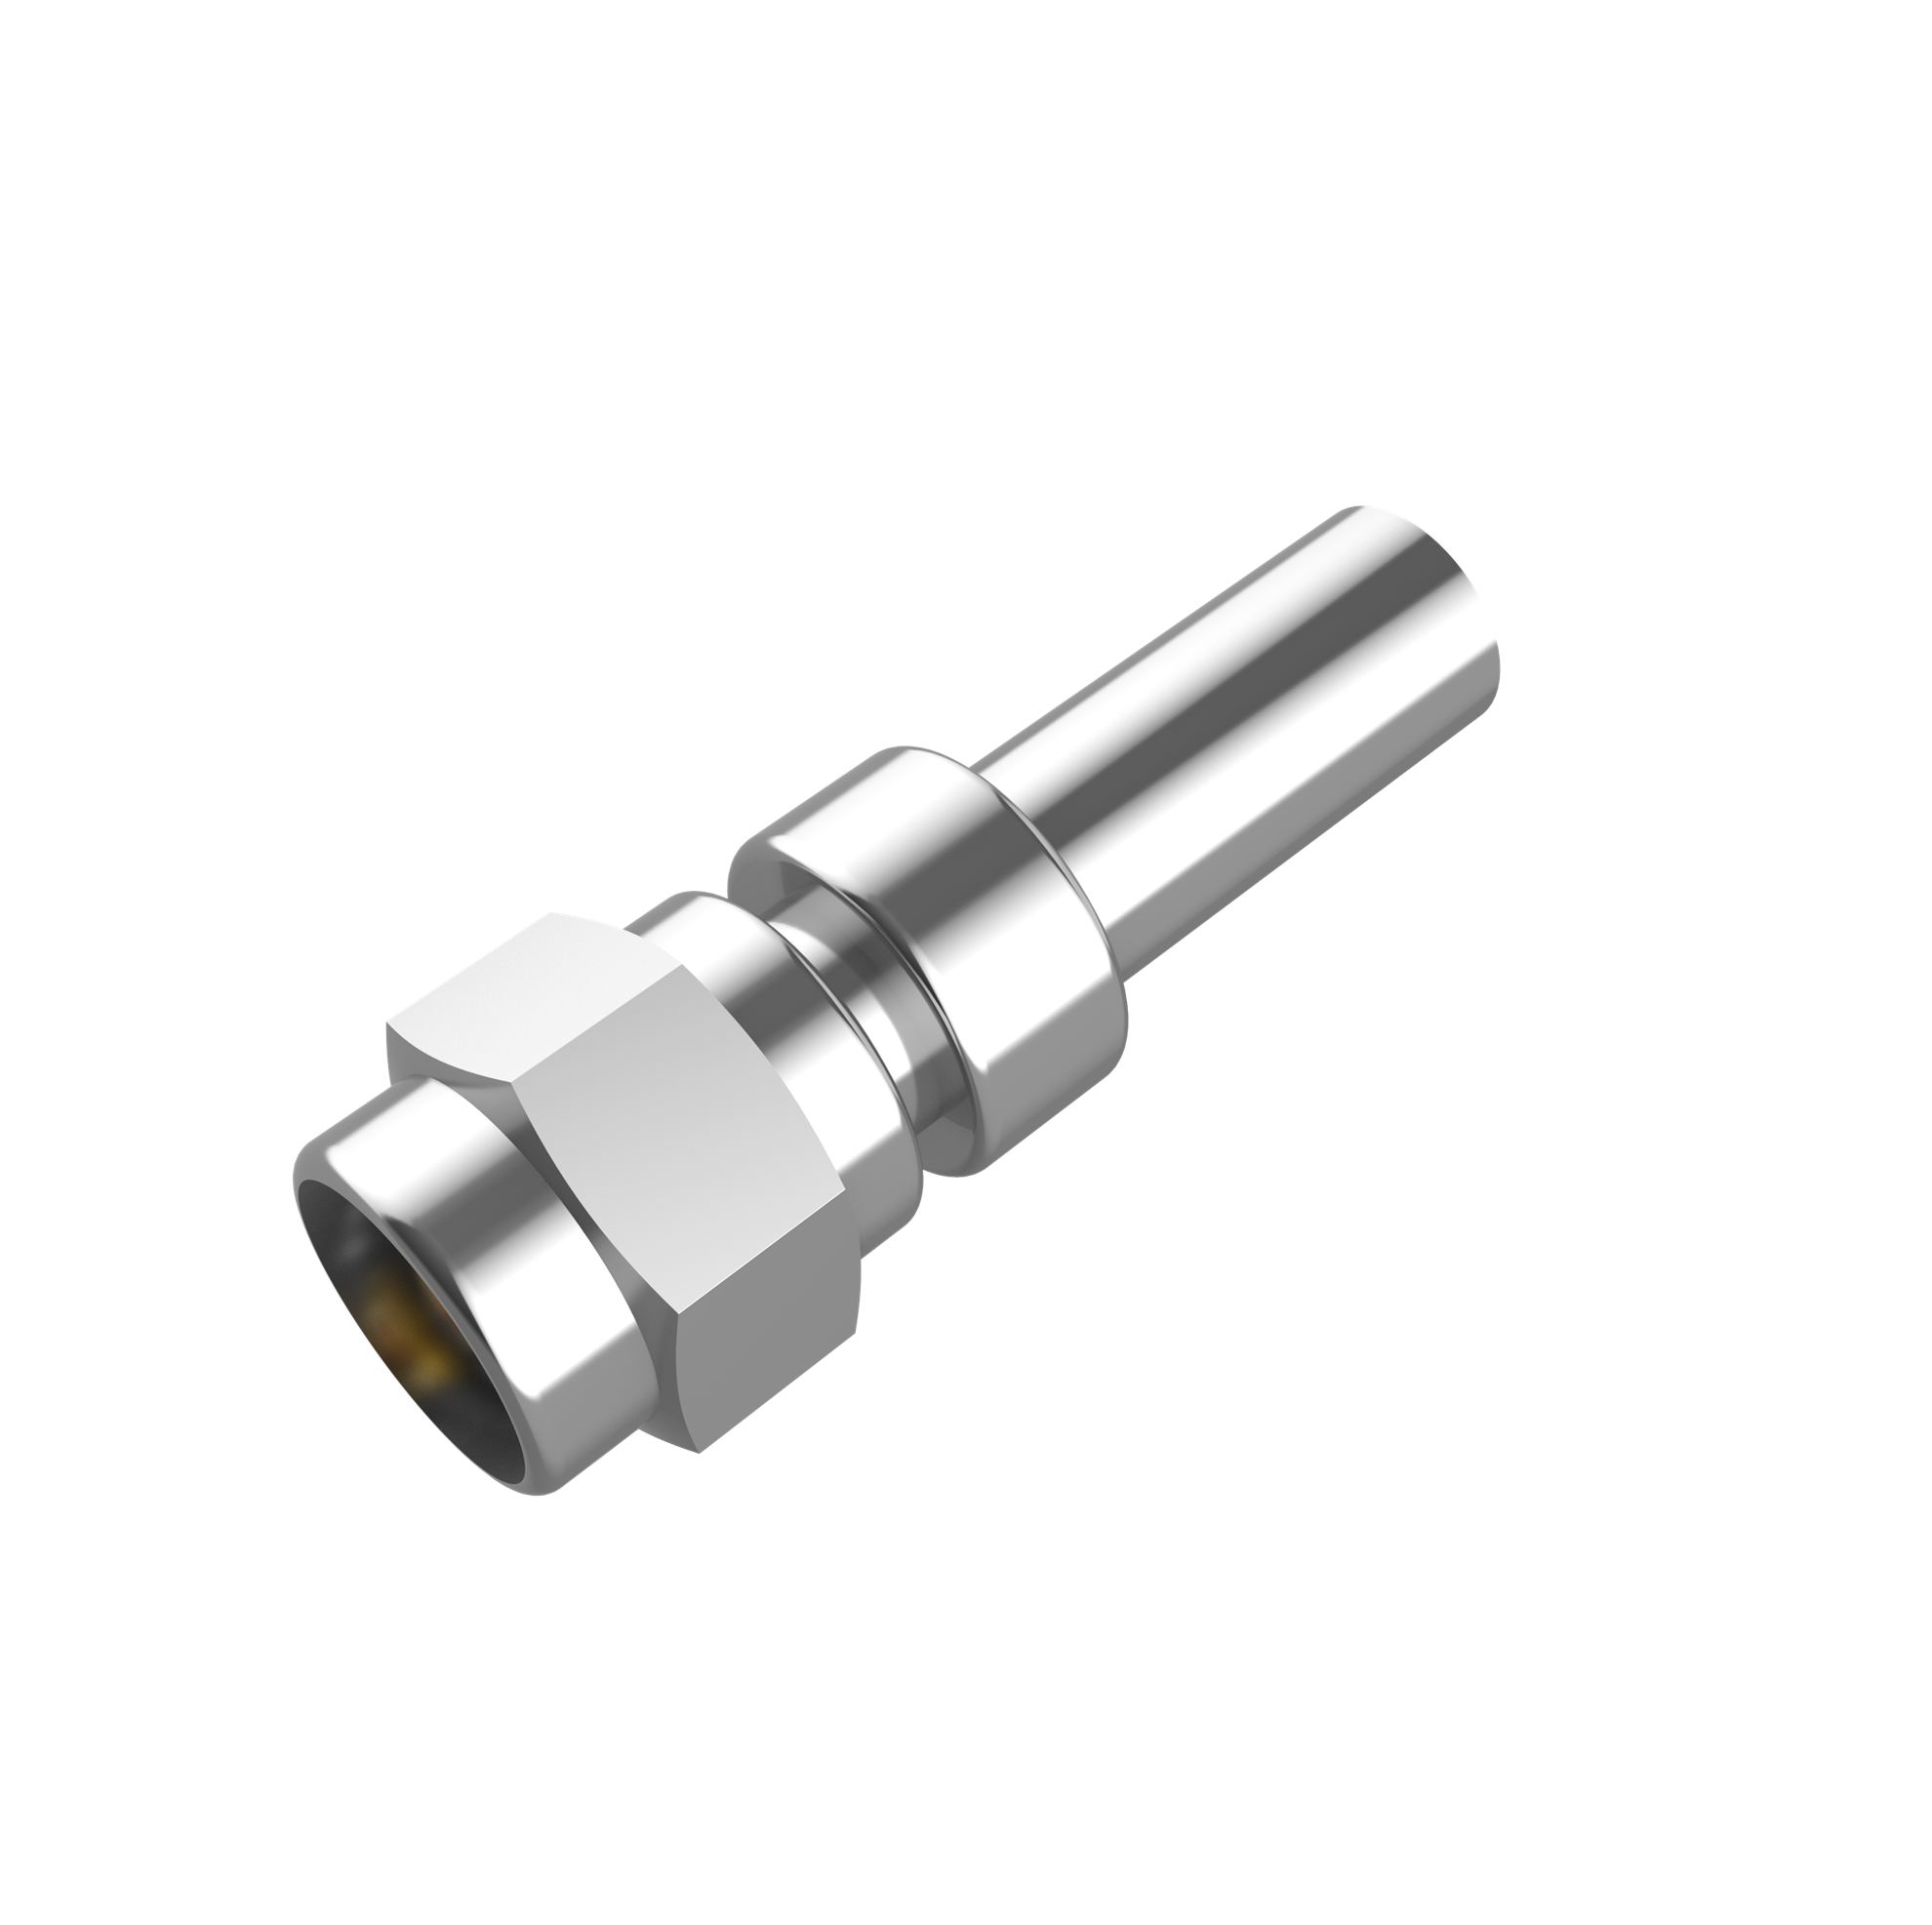 SMC Connector Jack Crimp Straight For RG316 Coaxial Cable